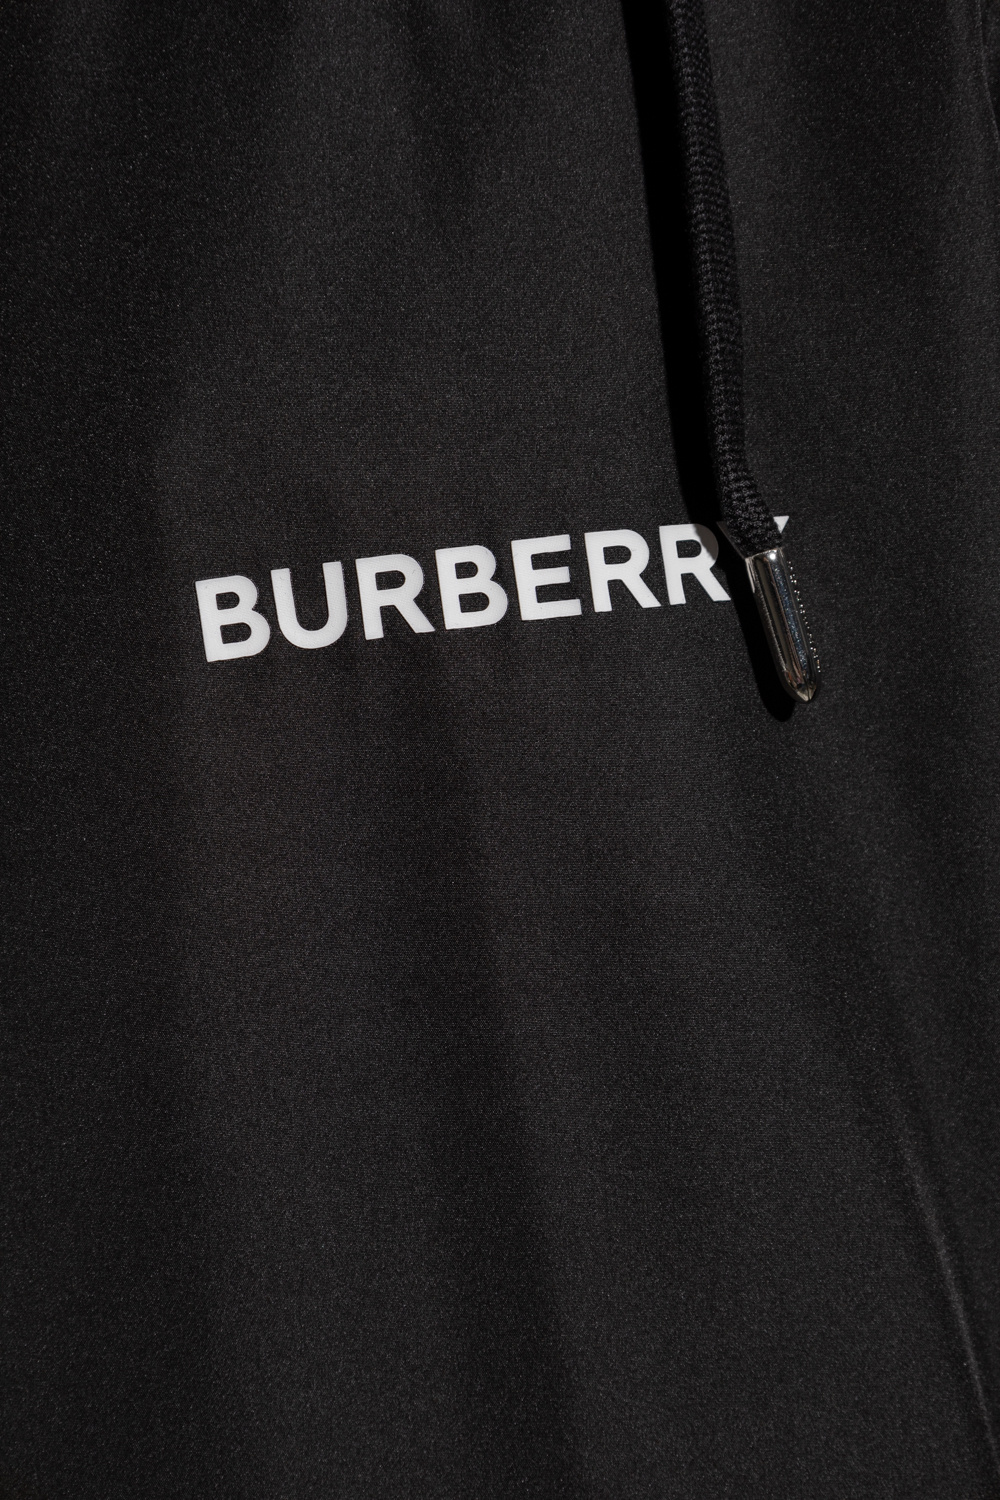 burberry jeans ‘Stanford’ jacket